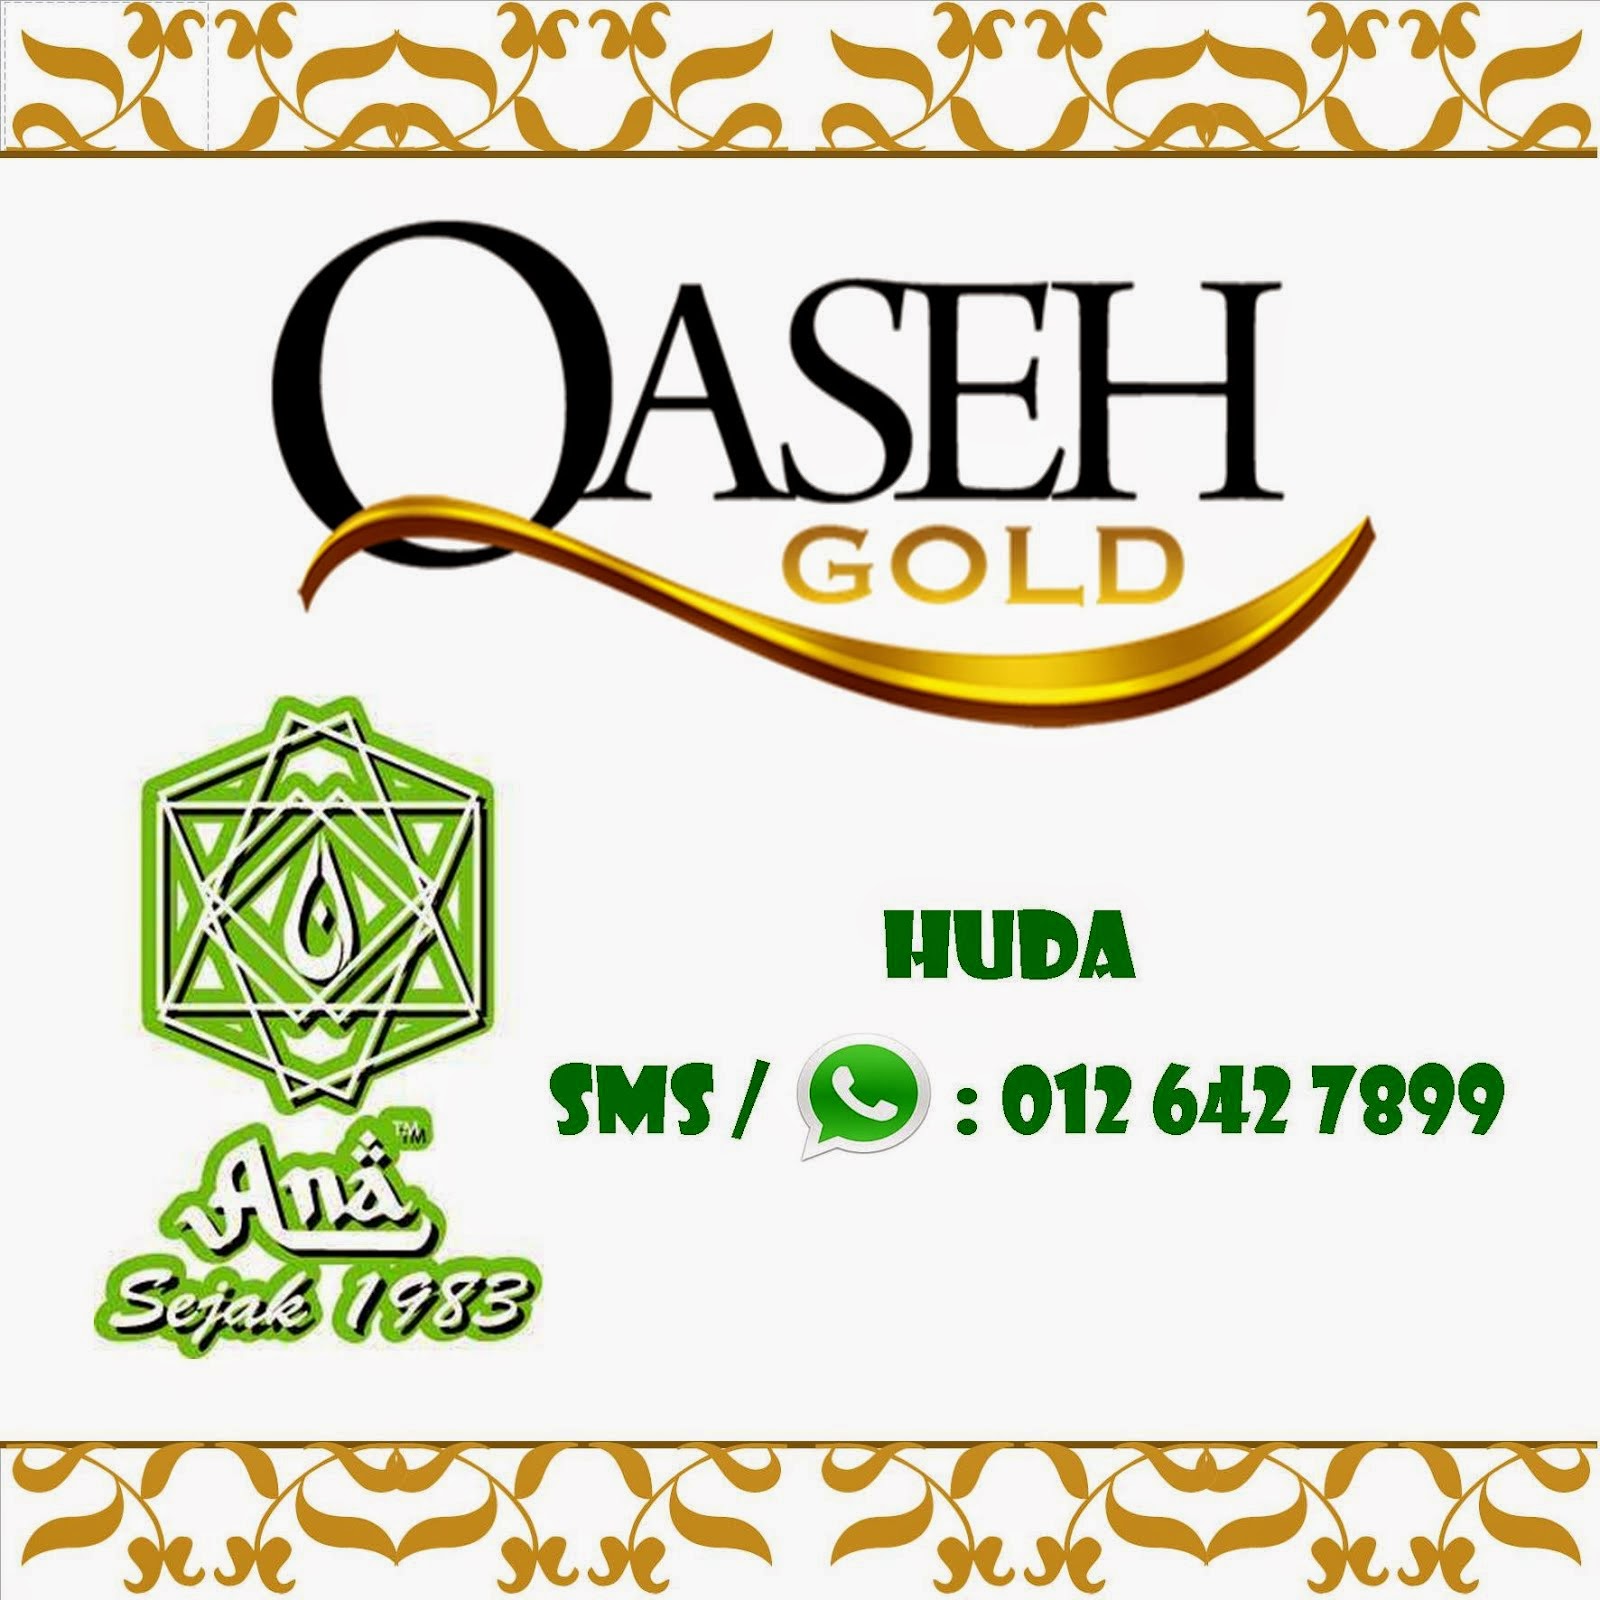 Feel Free To Visit & Like My Qaseh Page!